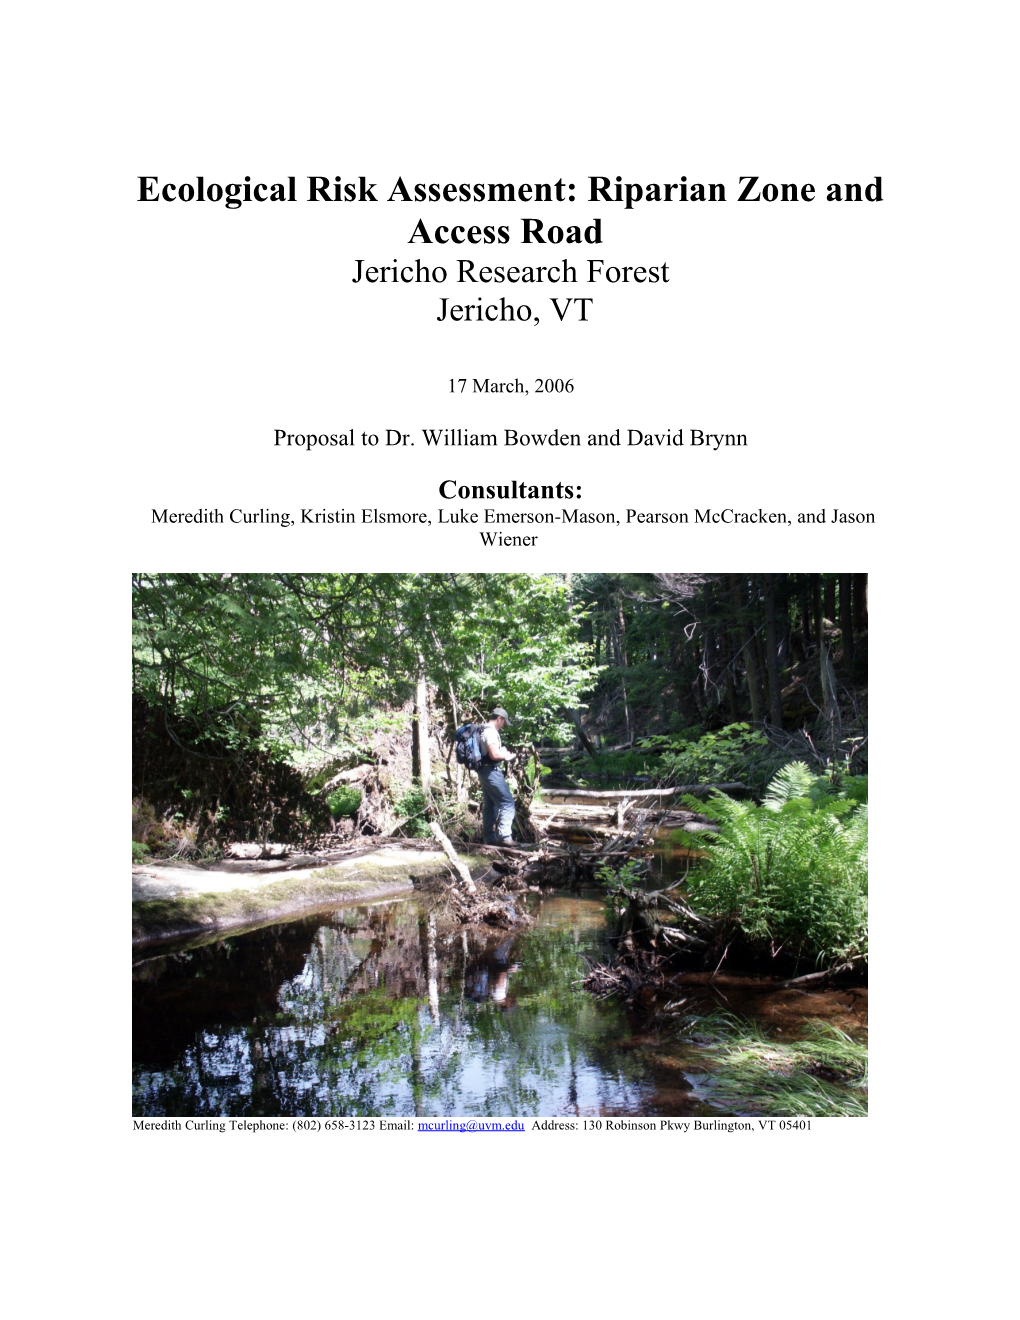 Ecological Risk Assessment: Riparian Zone and Access Road Jericho Research Forest